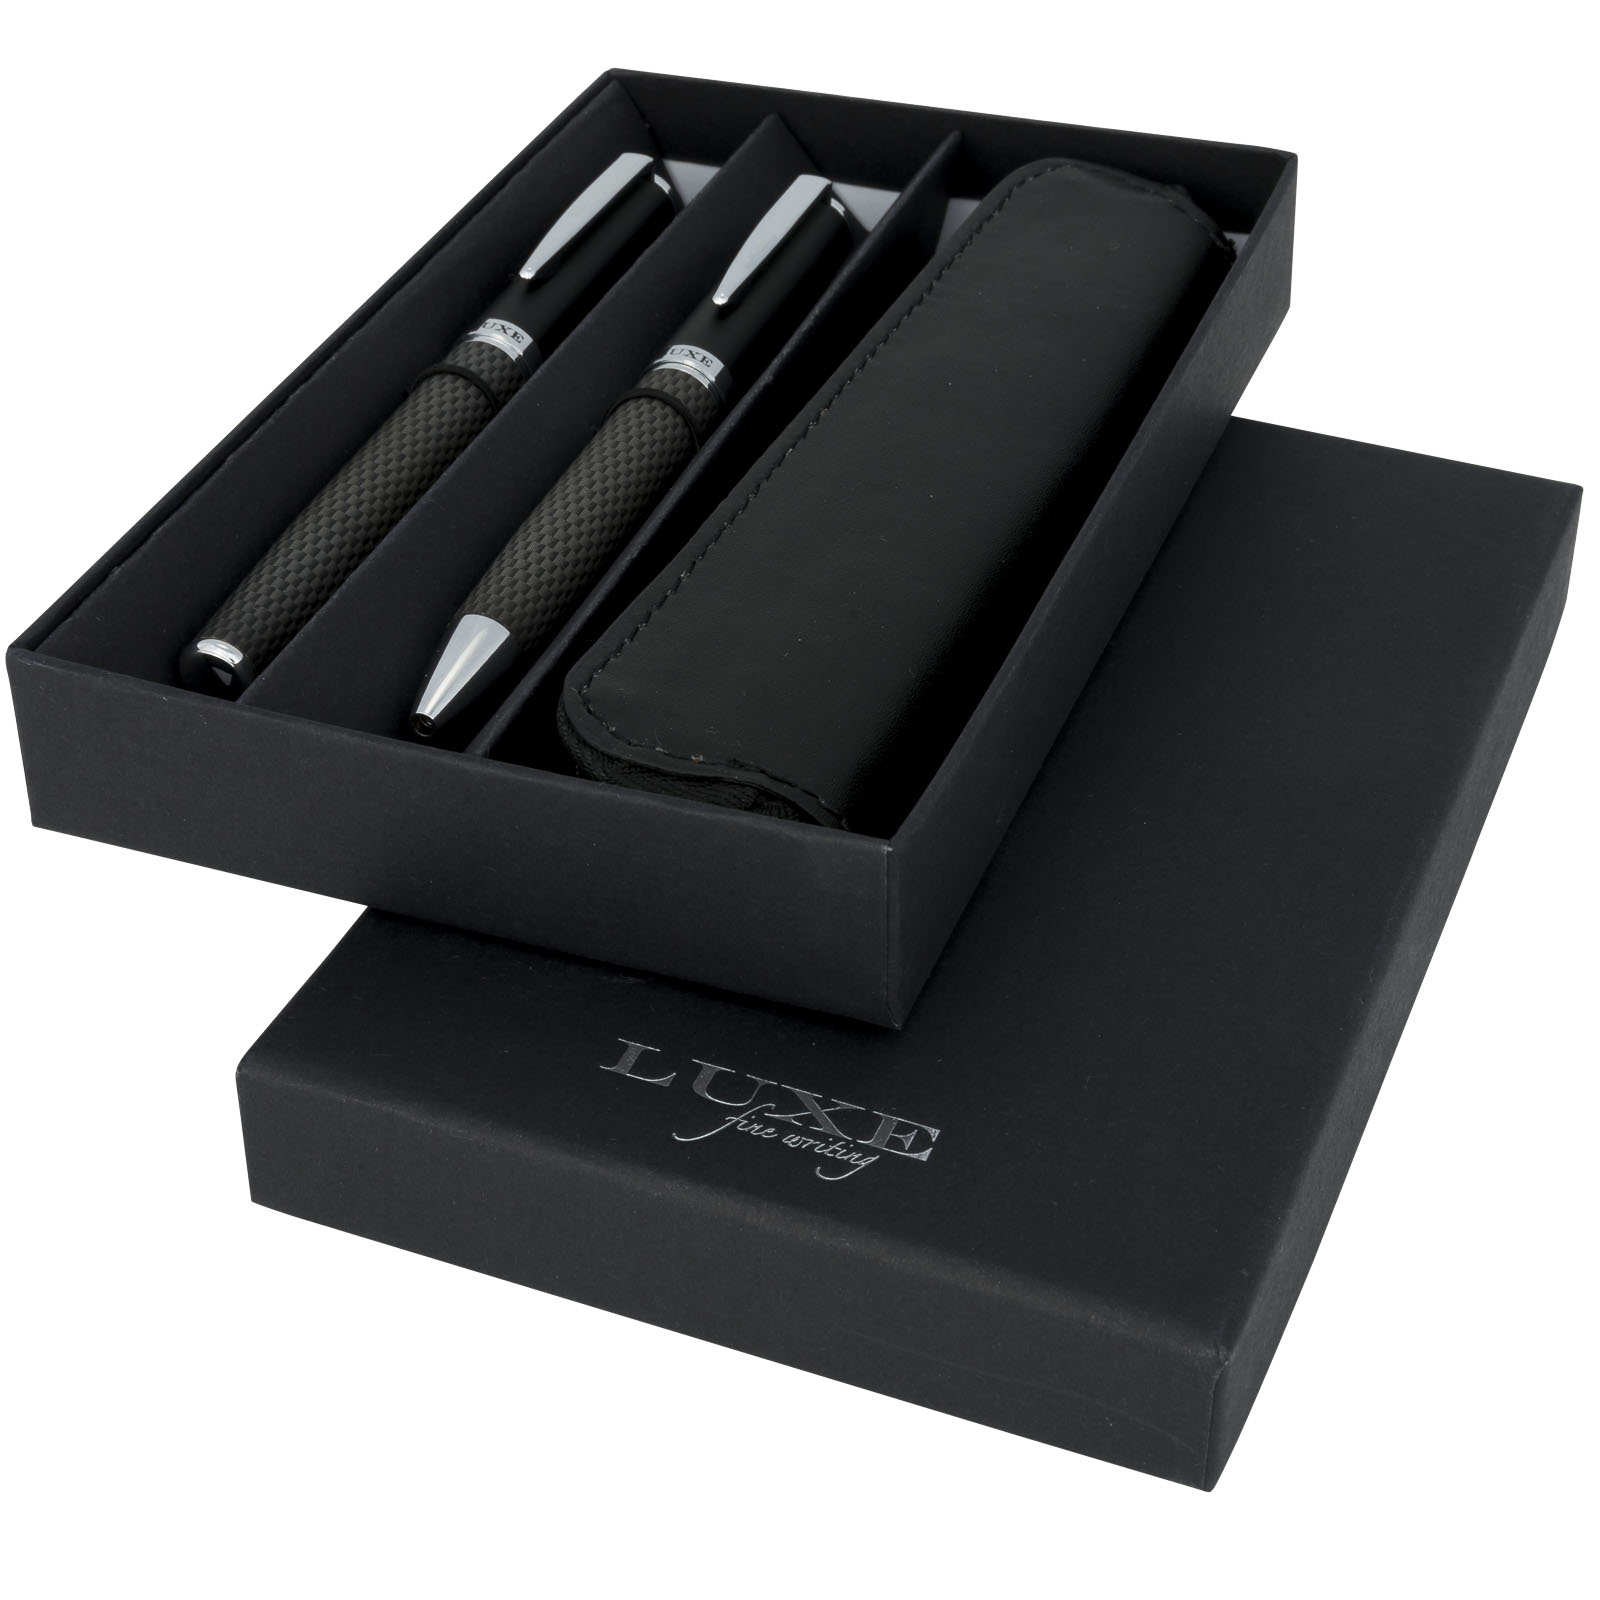 Advertising Gift sets - Carbon duo pen gift set with pouch